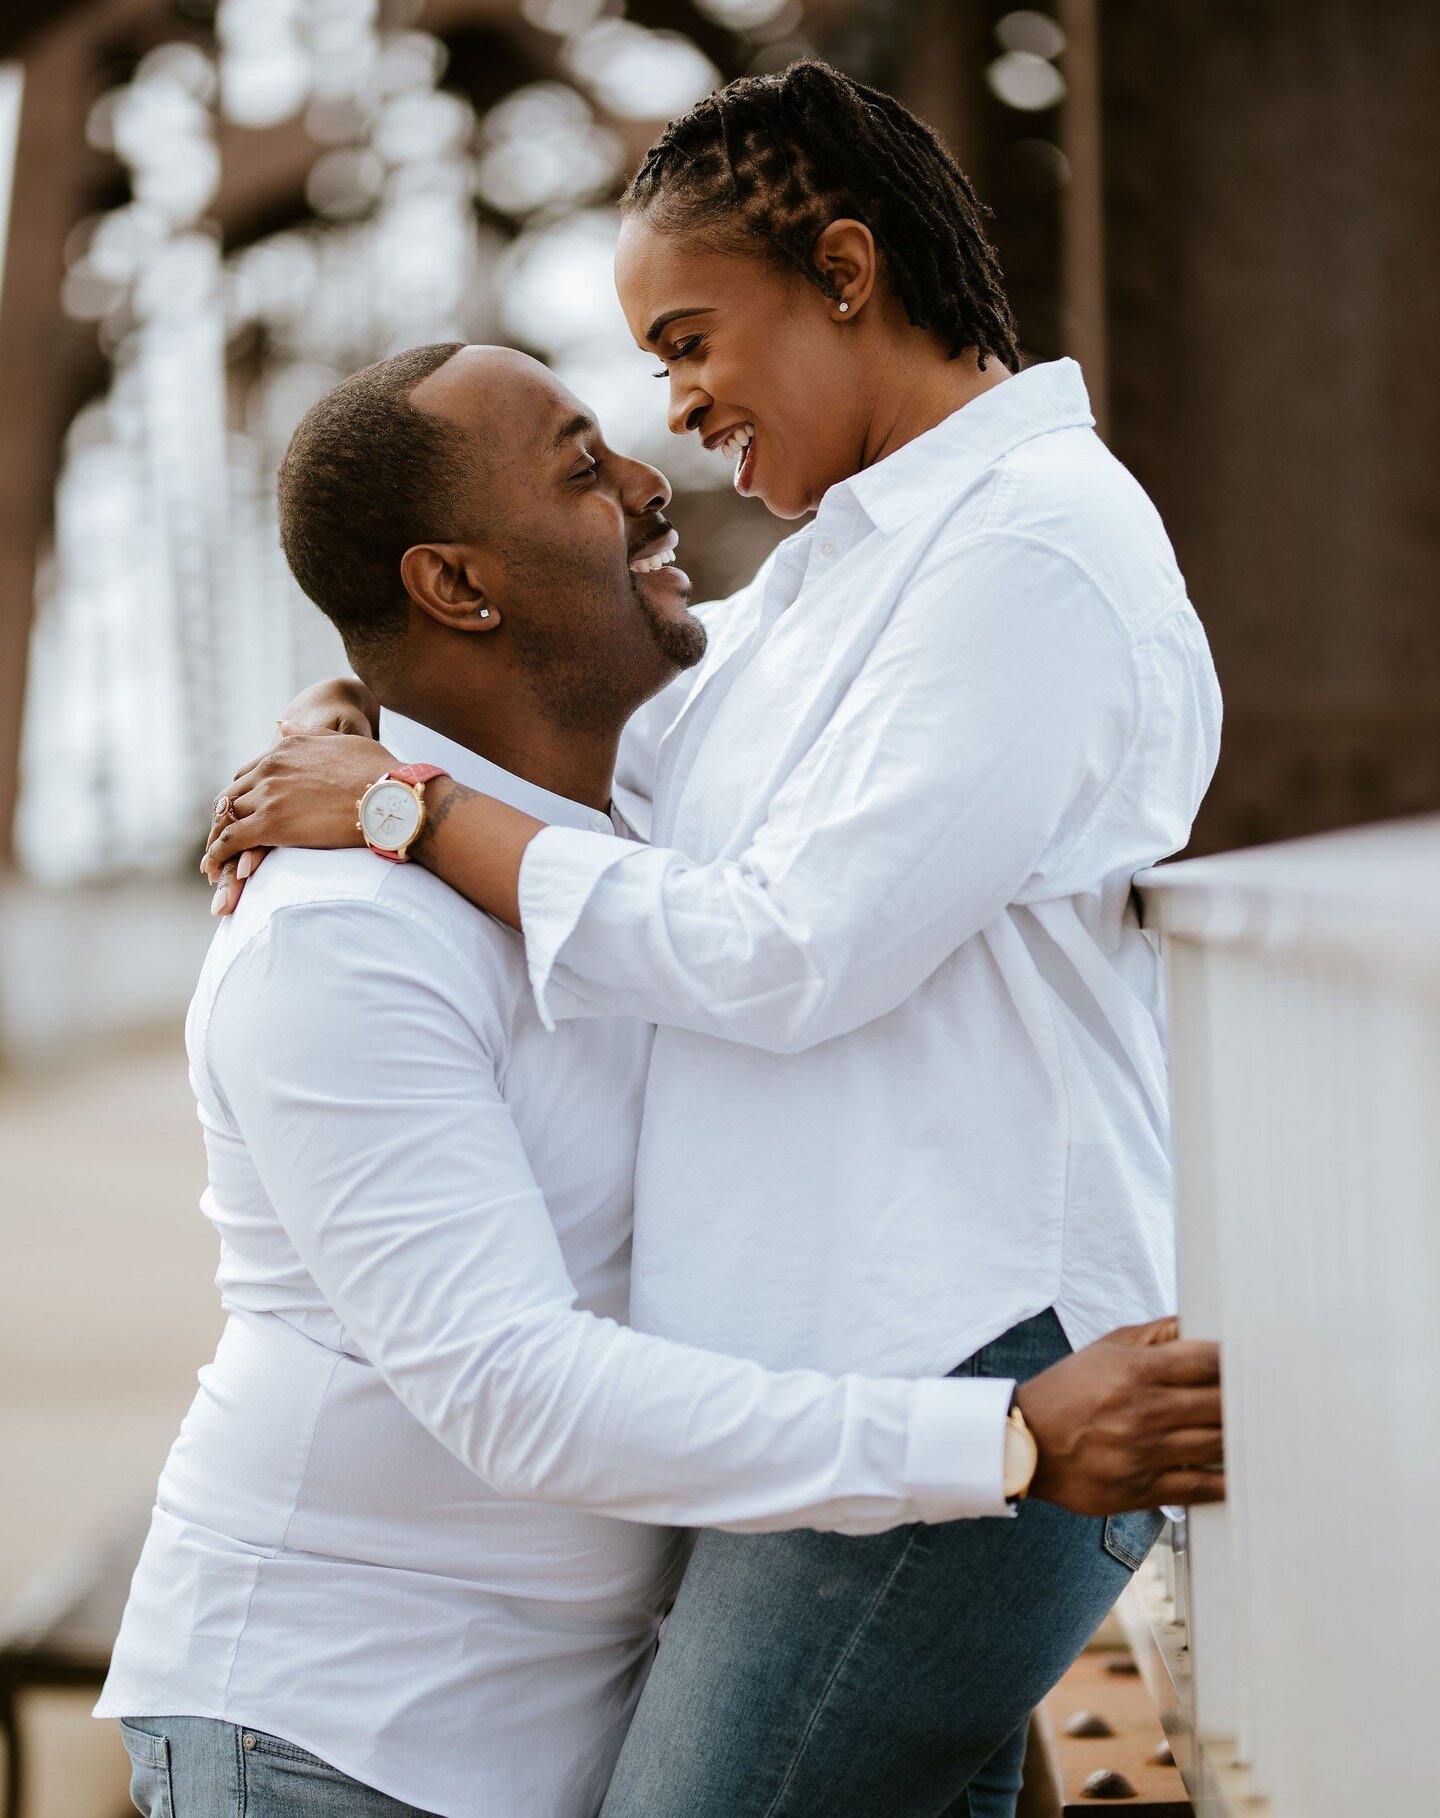 On a day that was cooler than you'd think it would be in late spring in Louisville, Phylise and Anthony brought allll the warmth. Next time we get to capture these smiles, it'll be the peak of summer!

#engagementphotos #louisvilleweddingphotographer